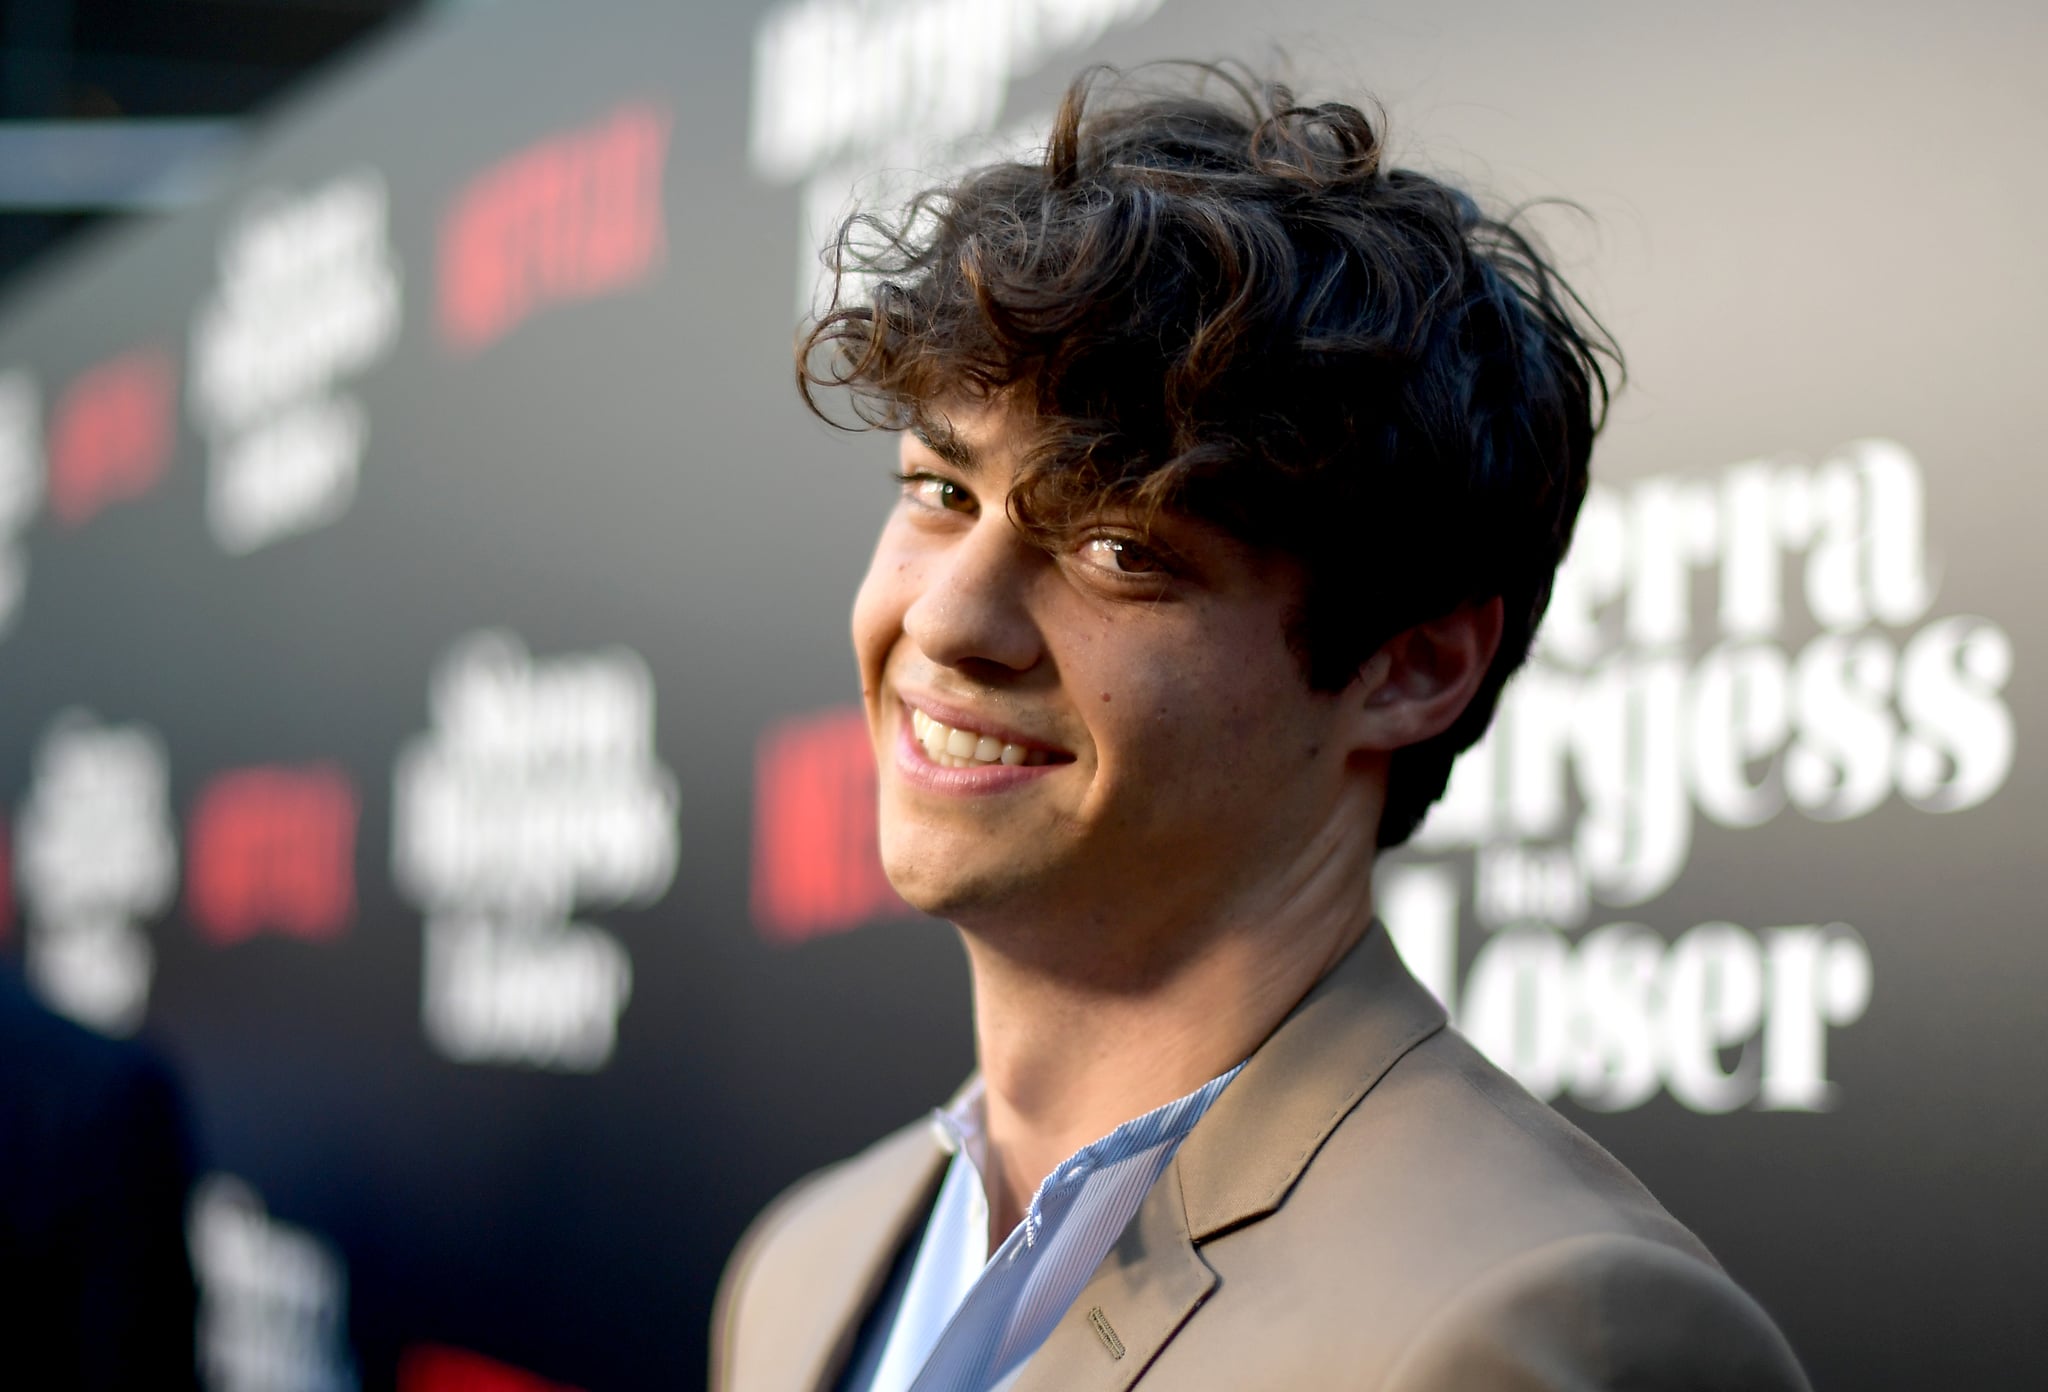 HOLLYWOOD, CA - AUGUST 30:  Noah Centineo attends the Los Angeles Premiere of the Netflix Film Sierra Burgess is a Loser at Arclight Hollywood on August 30, 2018 in Hollywood, California.  (Photo by Matt Winkelmeyer/Getty Images for Netflix)